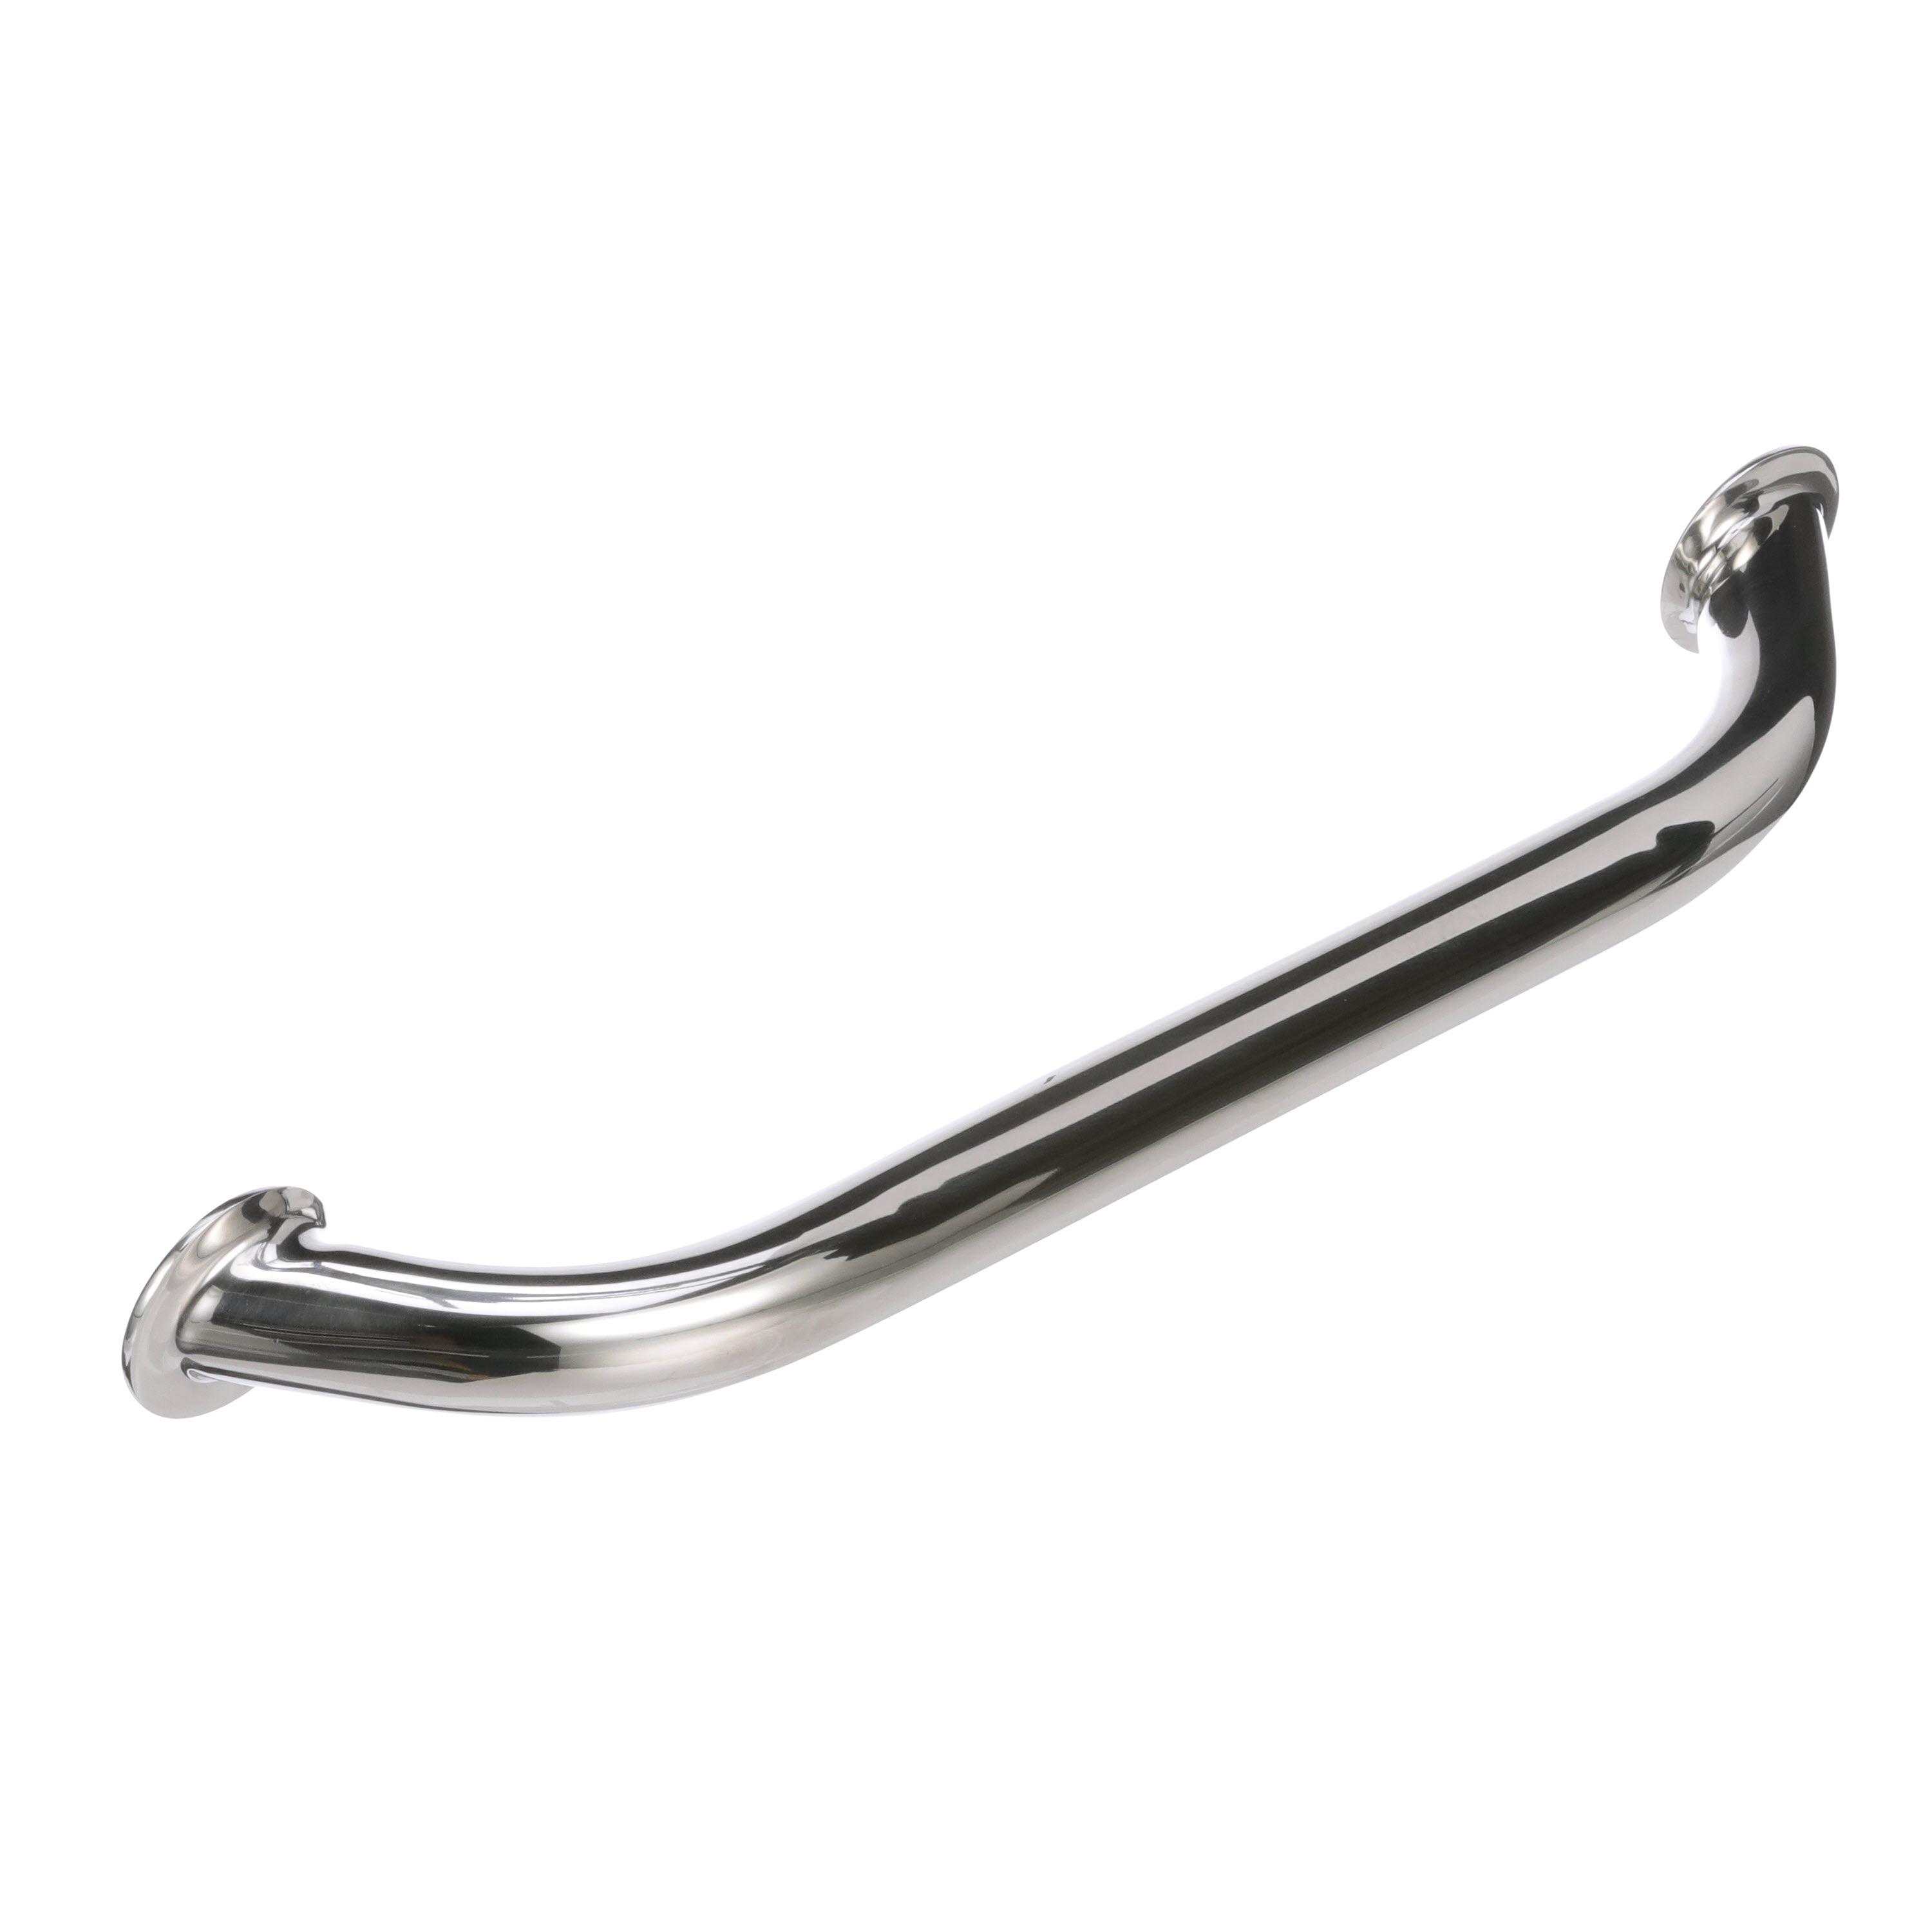 Hand Rail 304 Grade Stainless Steel Boat Grab Lengths Available 